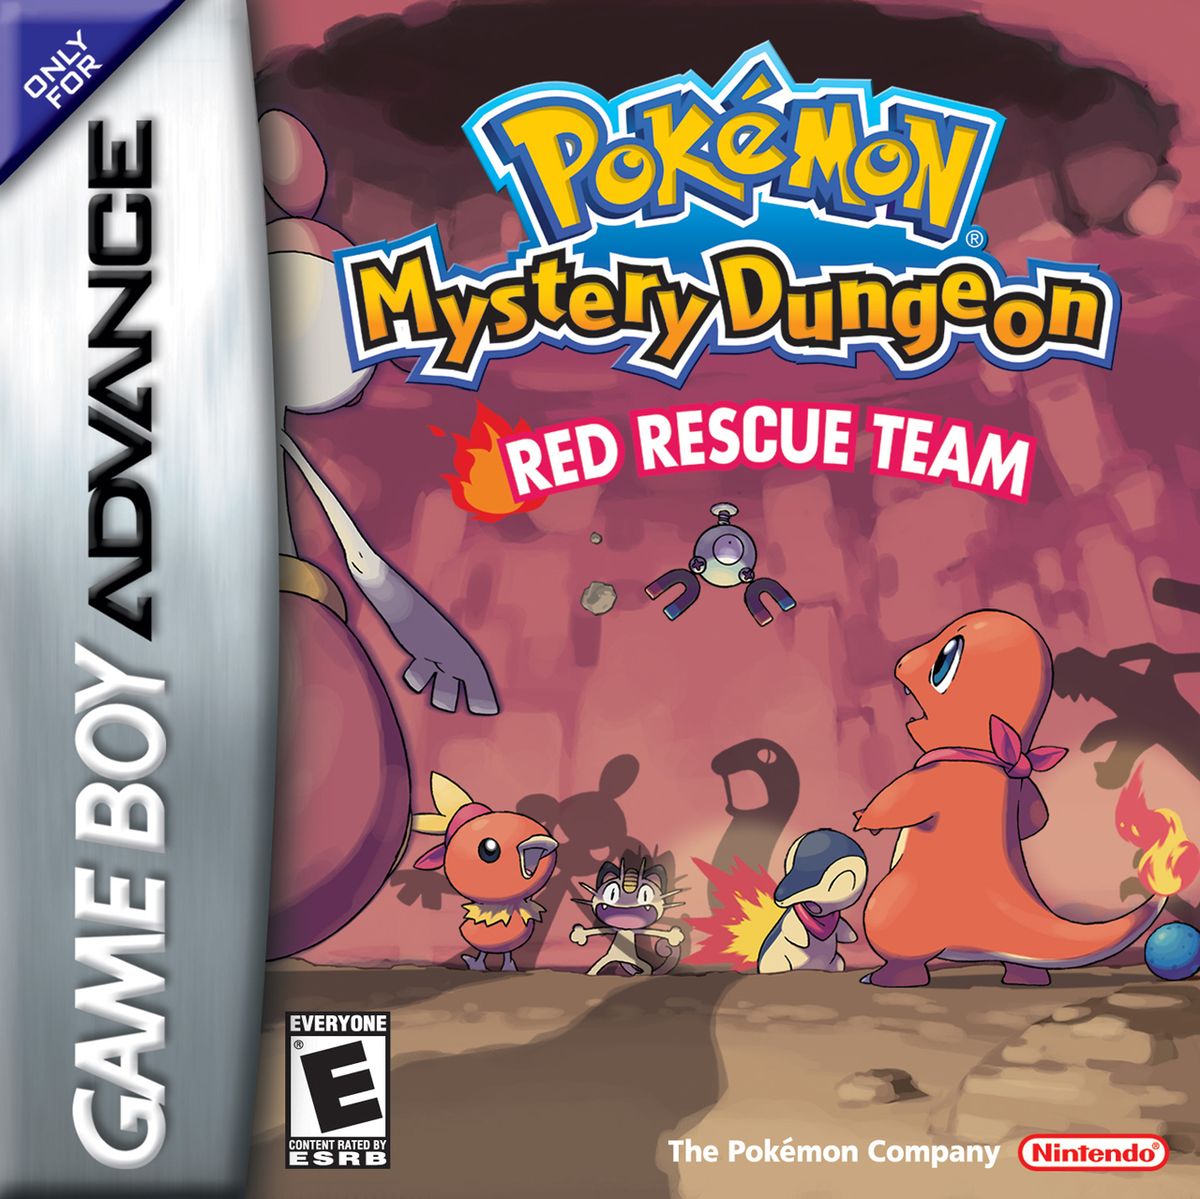 Pokémon Mystery Dungeon: Red Rescue Team and Blue Rescue Team - the community-driven Pokémon